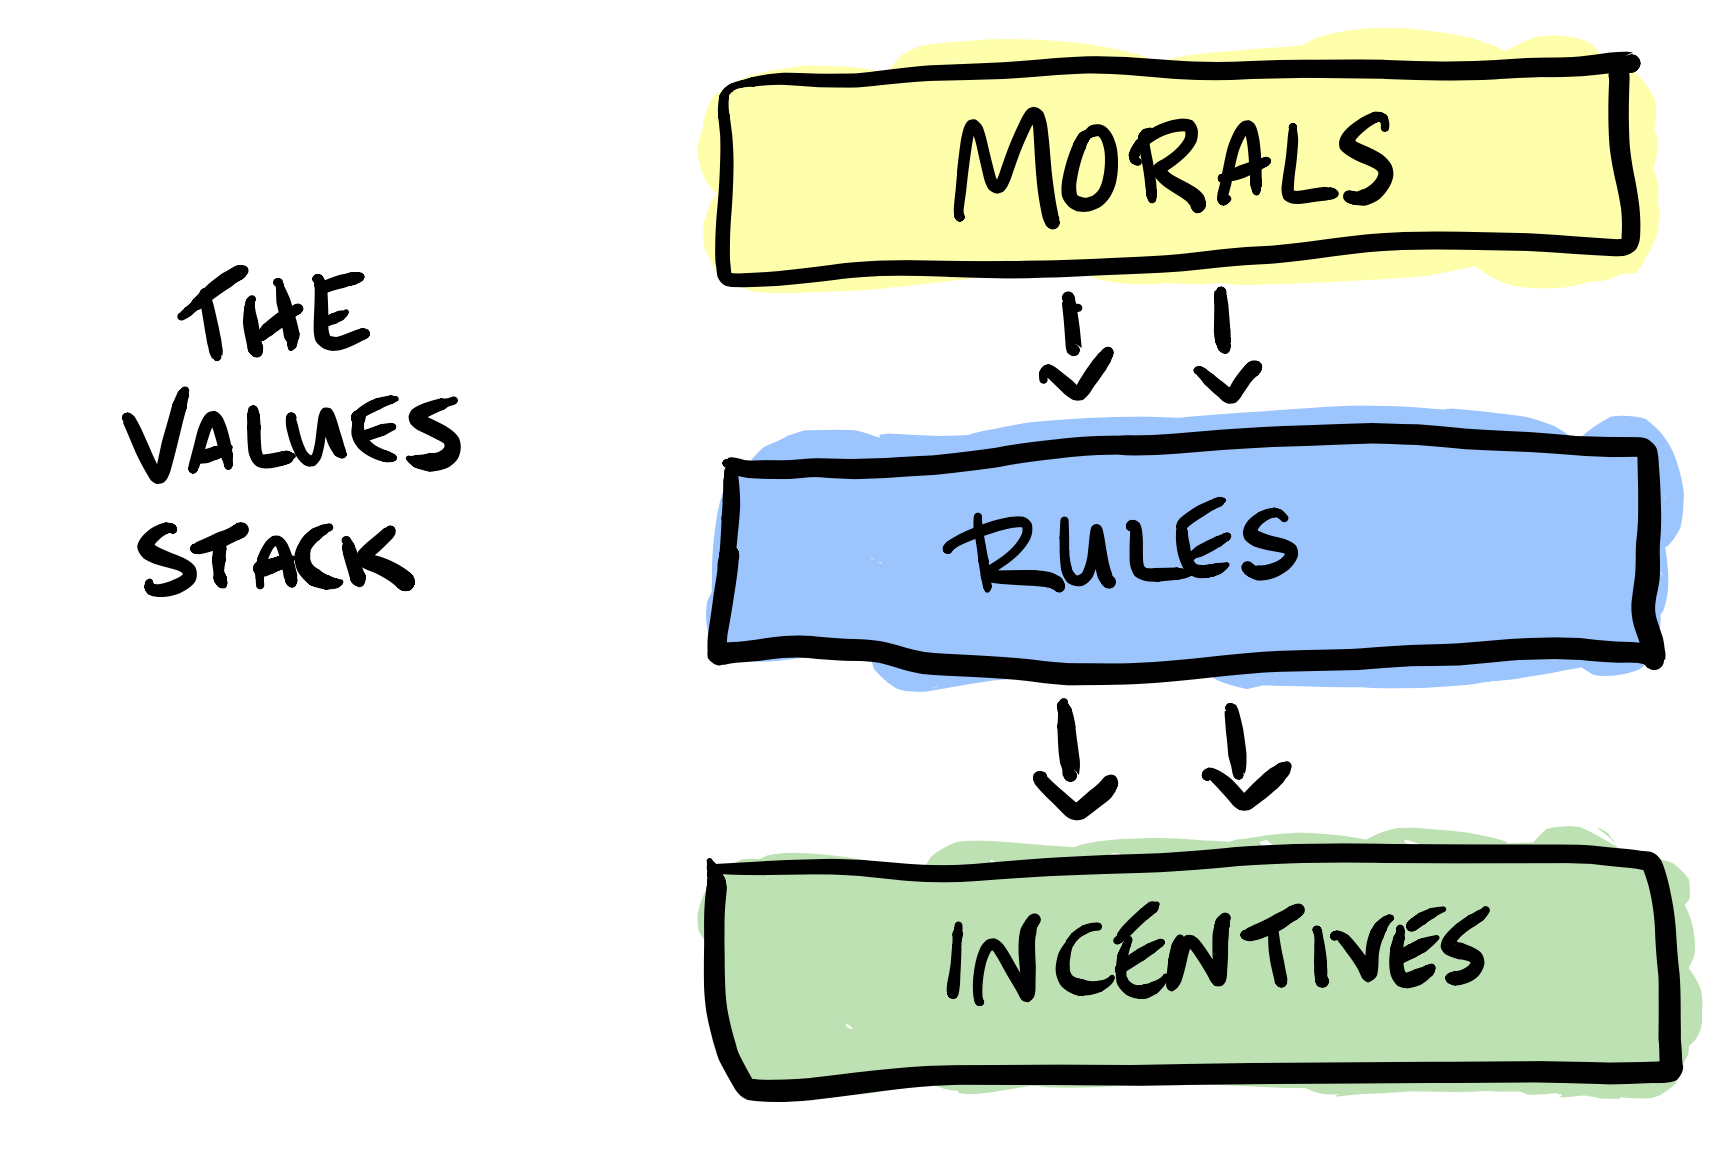 The values stack